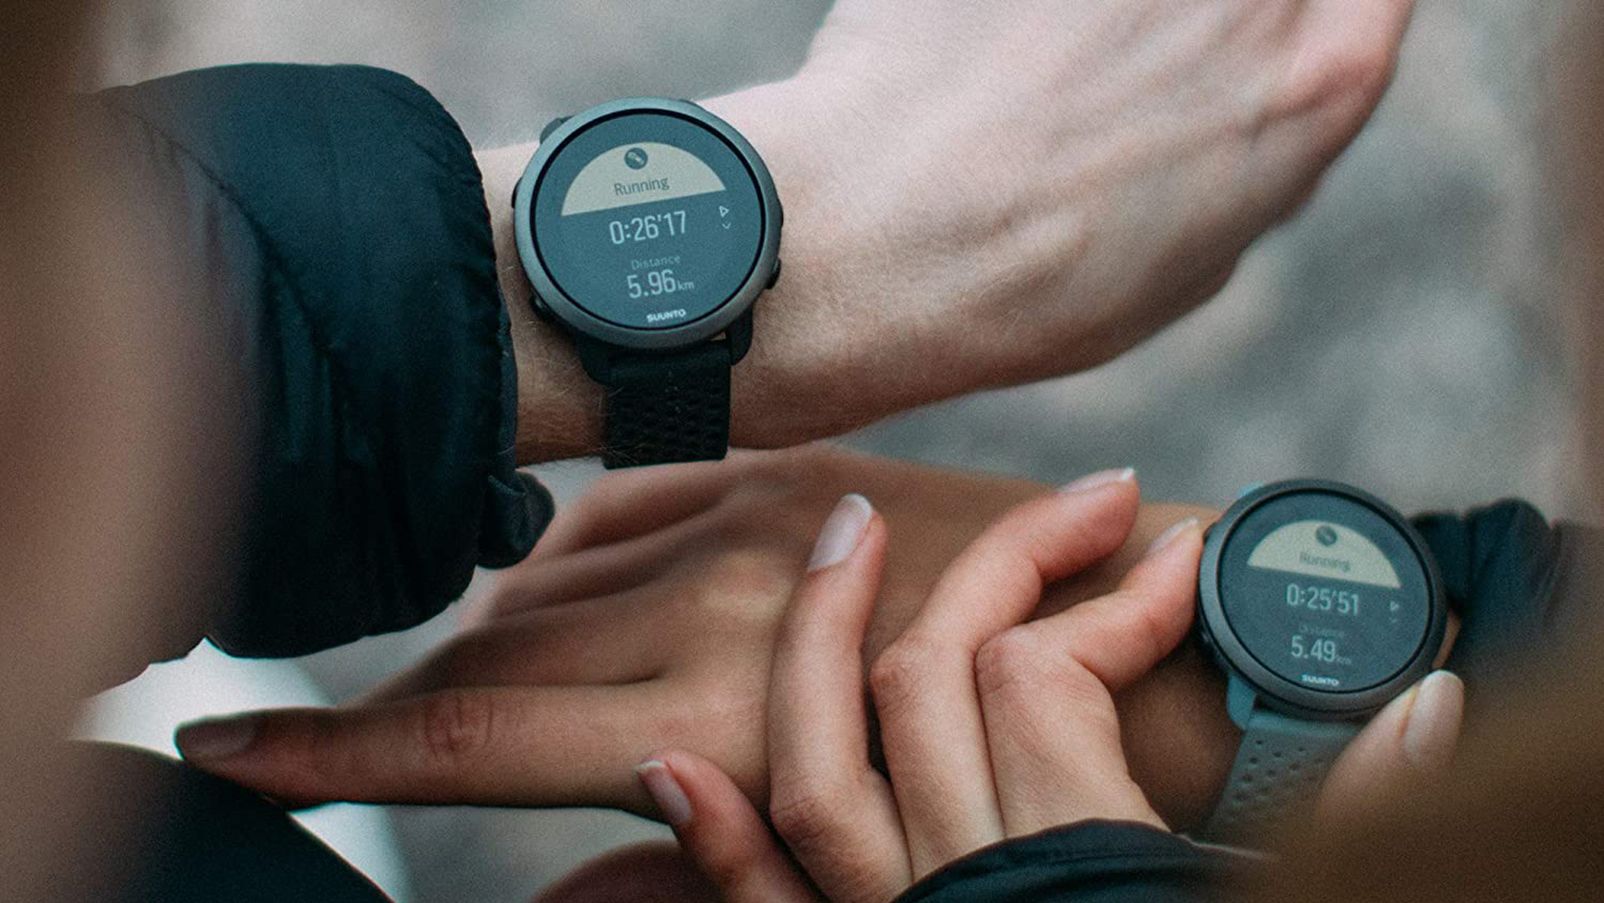 Suunto 7 with Wear OS - Hands-on details and interface walk-through 